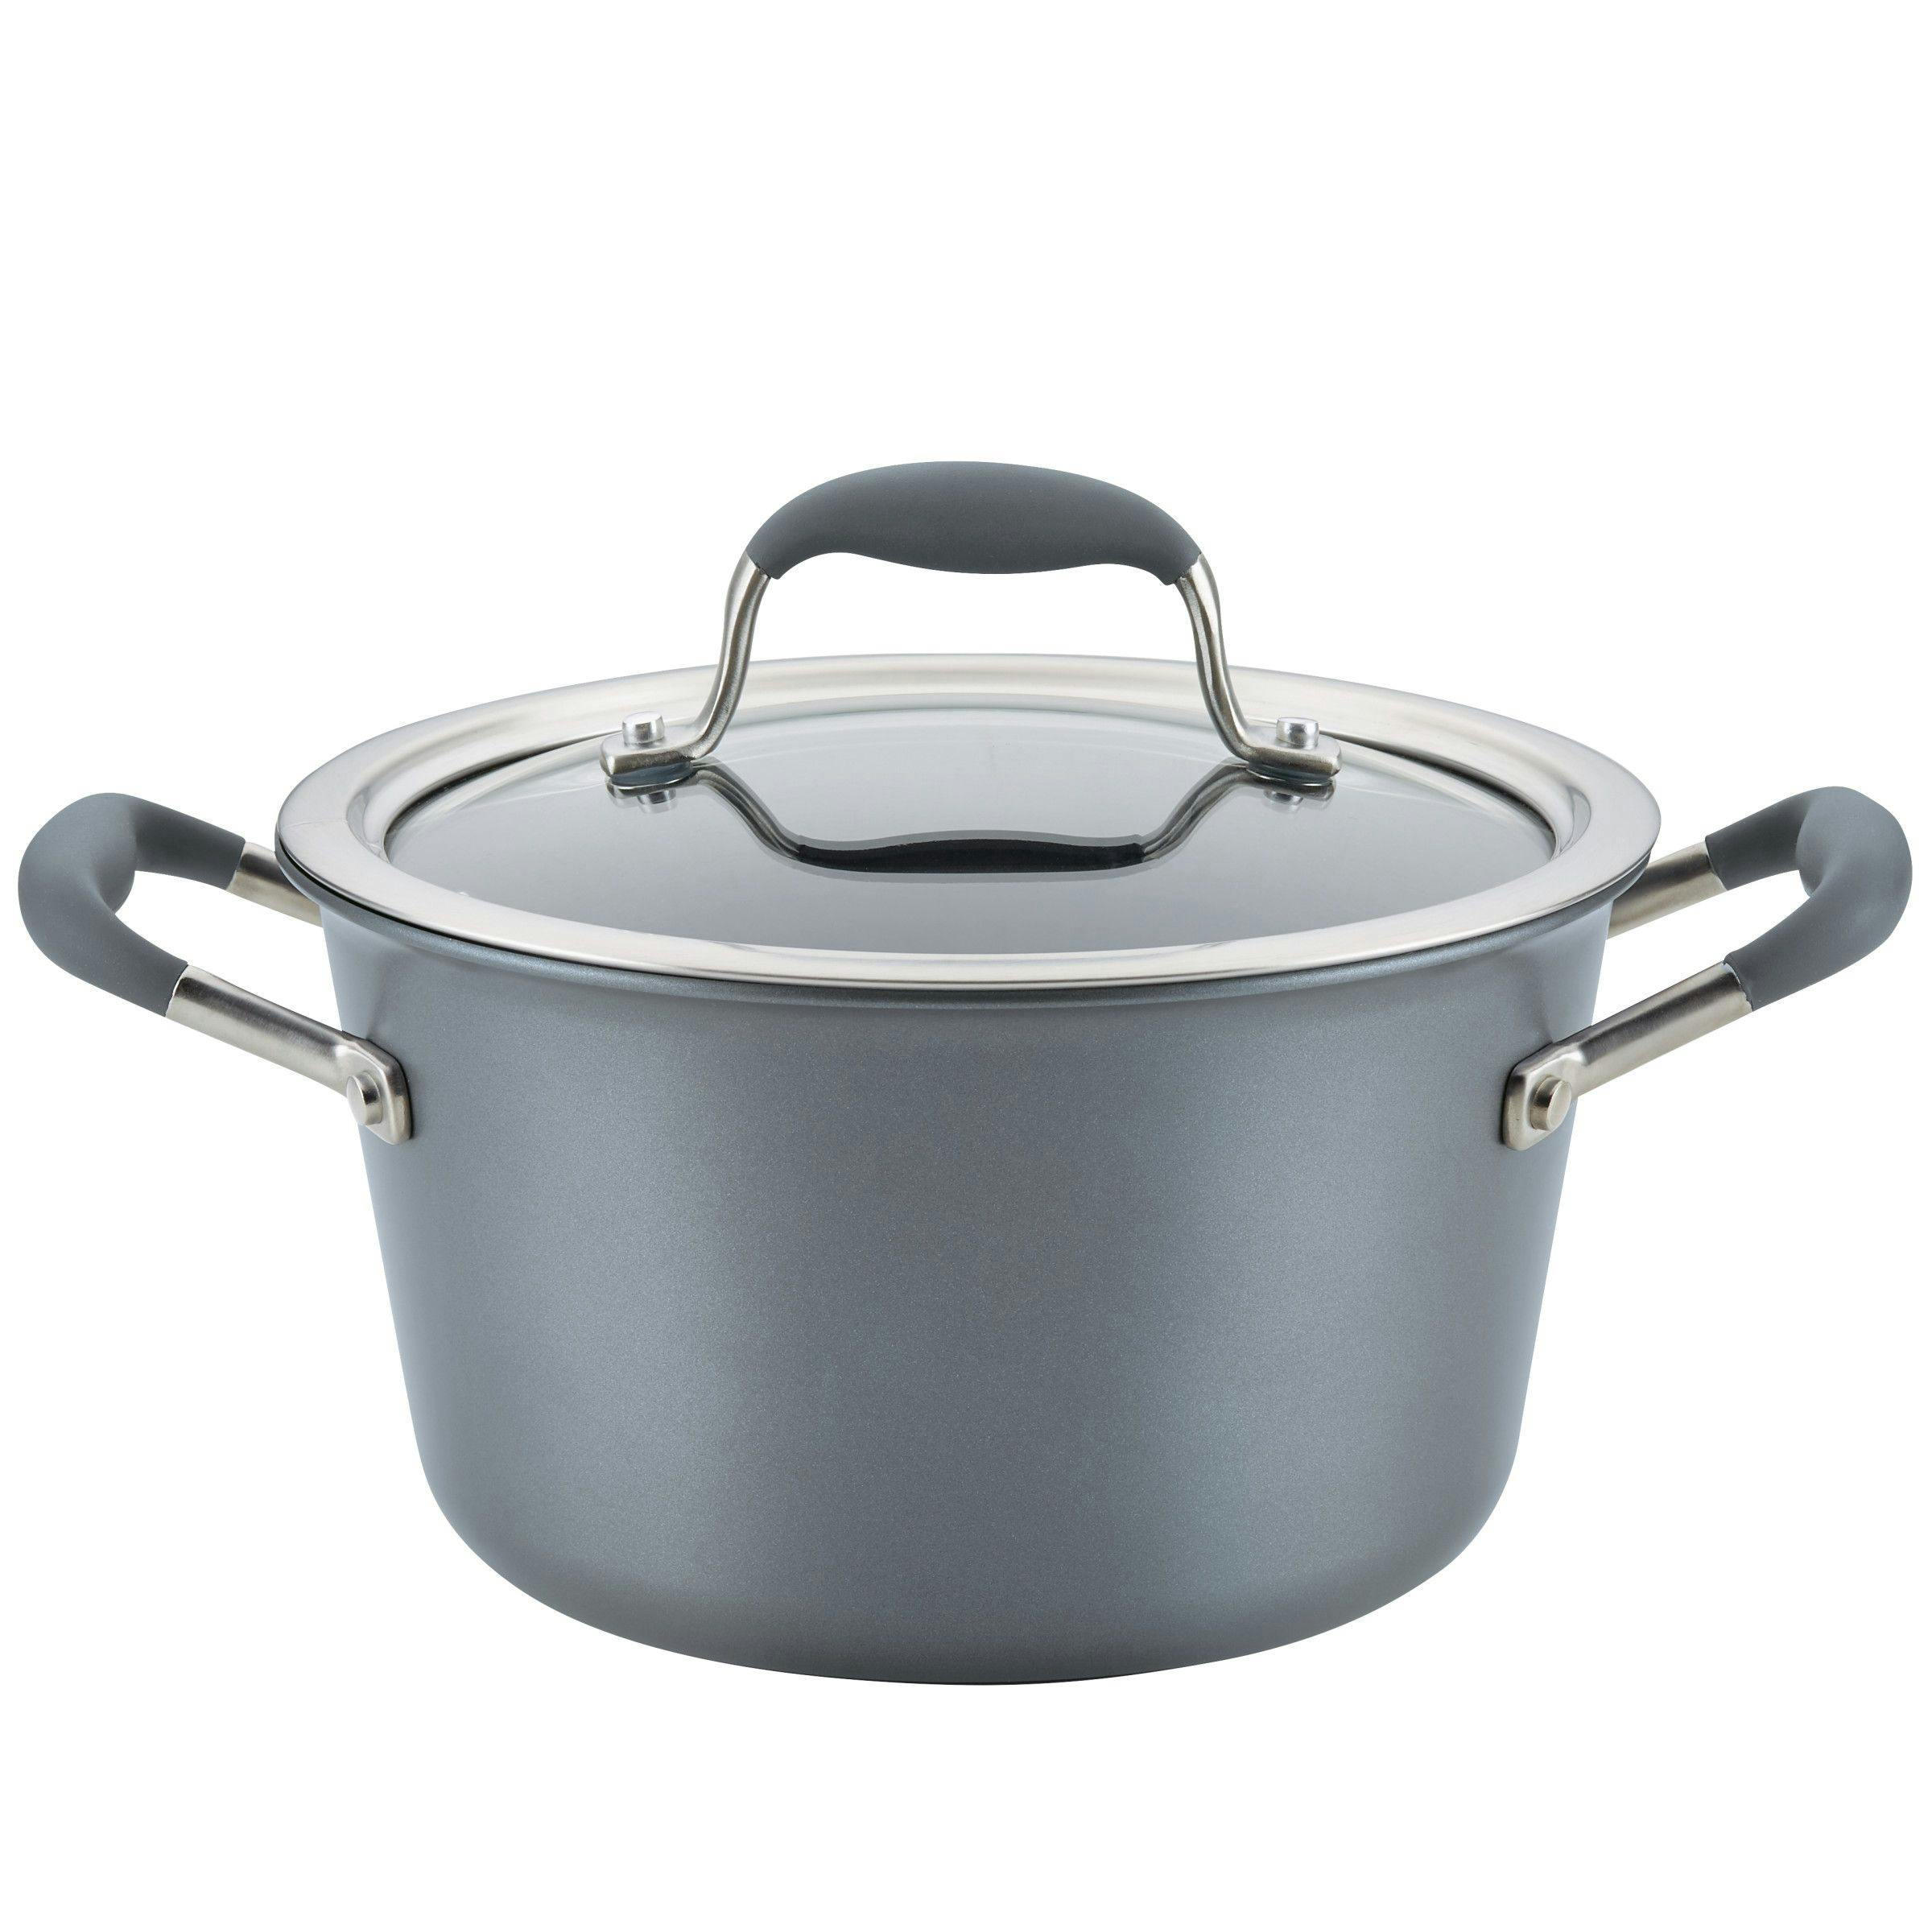 Anolon Advanced Home Hard-Anodized Nonstick Saucepot with Lid, 4.5-Quart, Moonstone